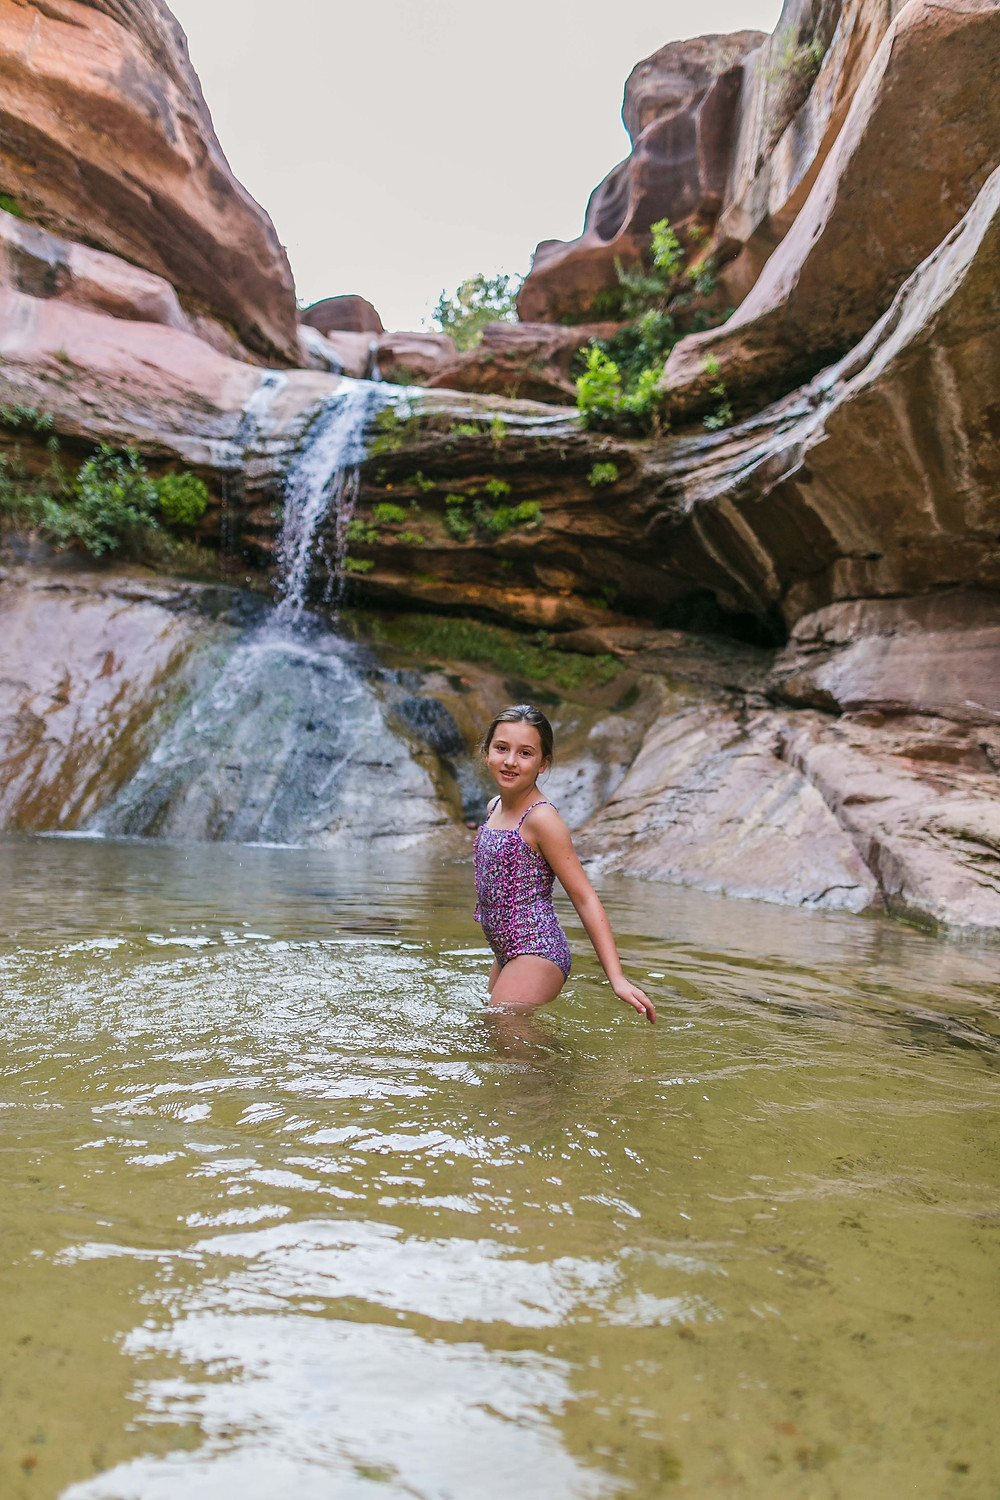 Jobs in restaurants, bars, cafeterias and bakeries including restaurant managers, chefs, bakers, servers, baristas, bartenders, dishwashers and more. Lower Pine Creek Falls Secret Waterfall Hike In Zion National Park